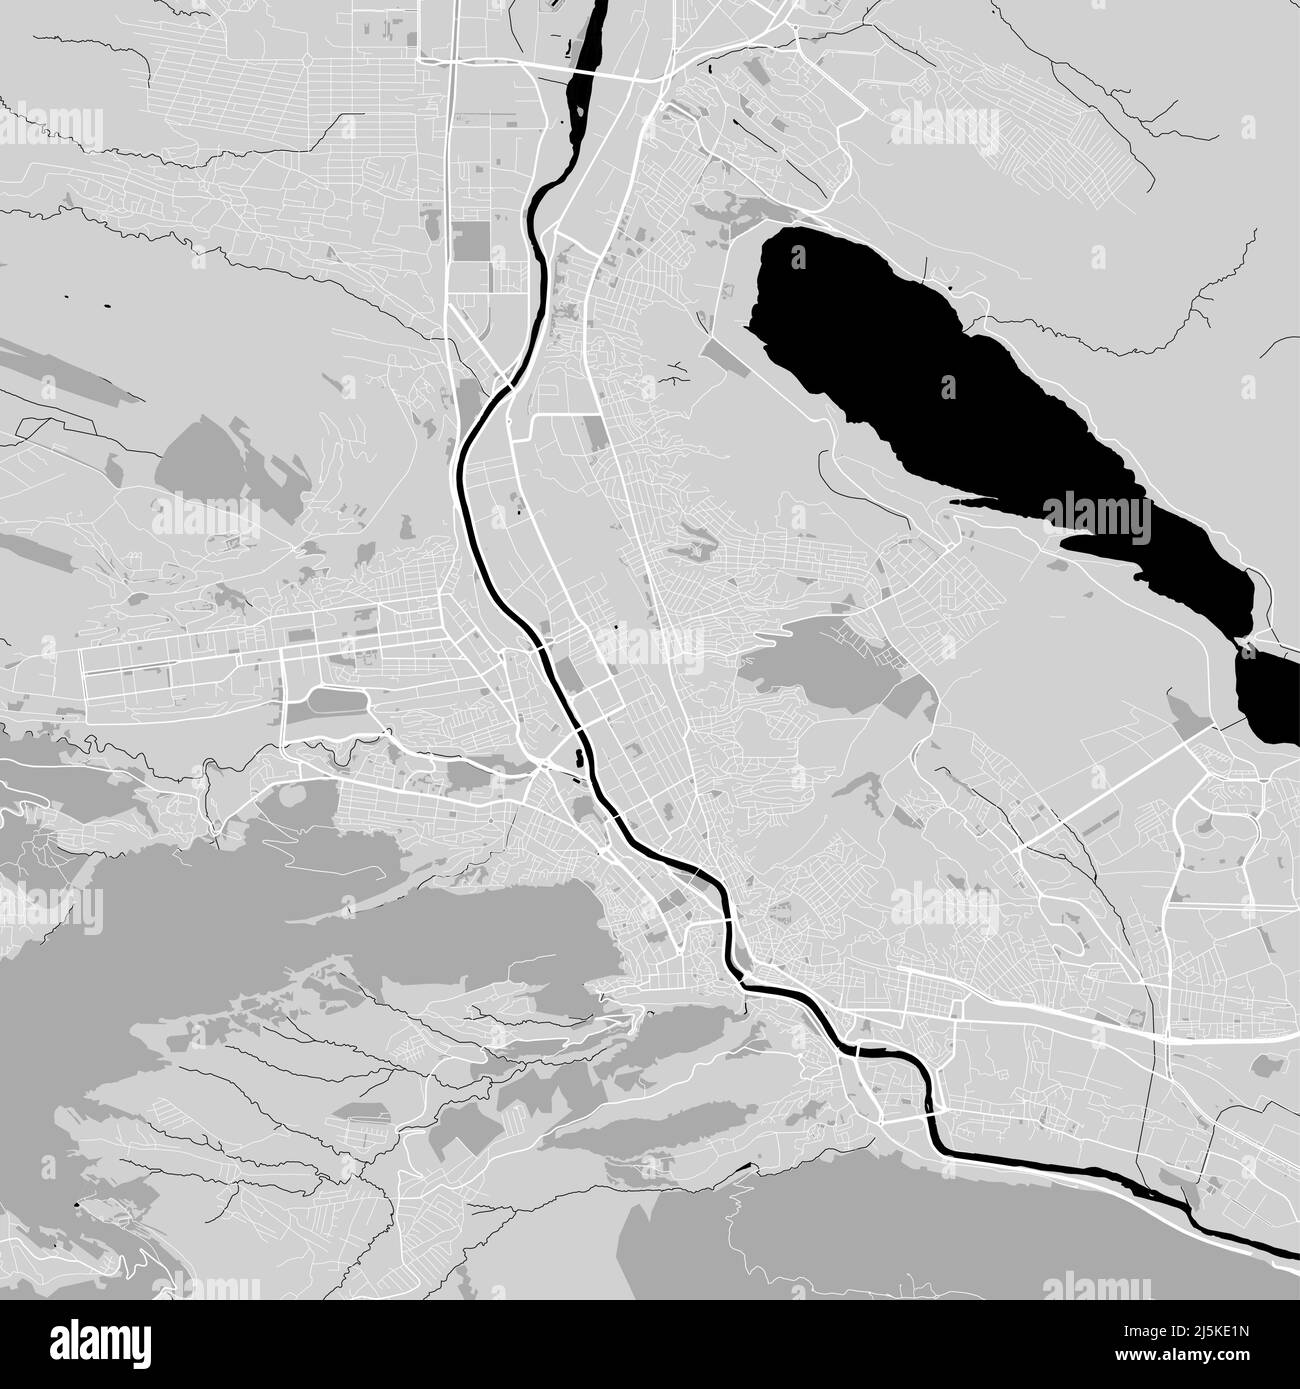 Urban city map of Tbilisi. Vector illustration, Tbilisi map grayscale art poster. Street map image with roads, metropolitan city area view. Stock Vector